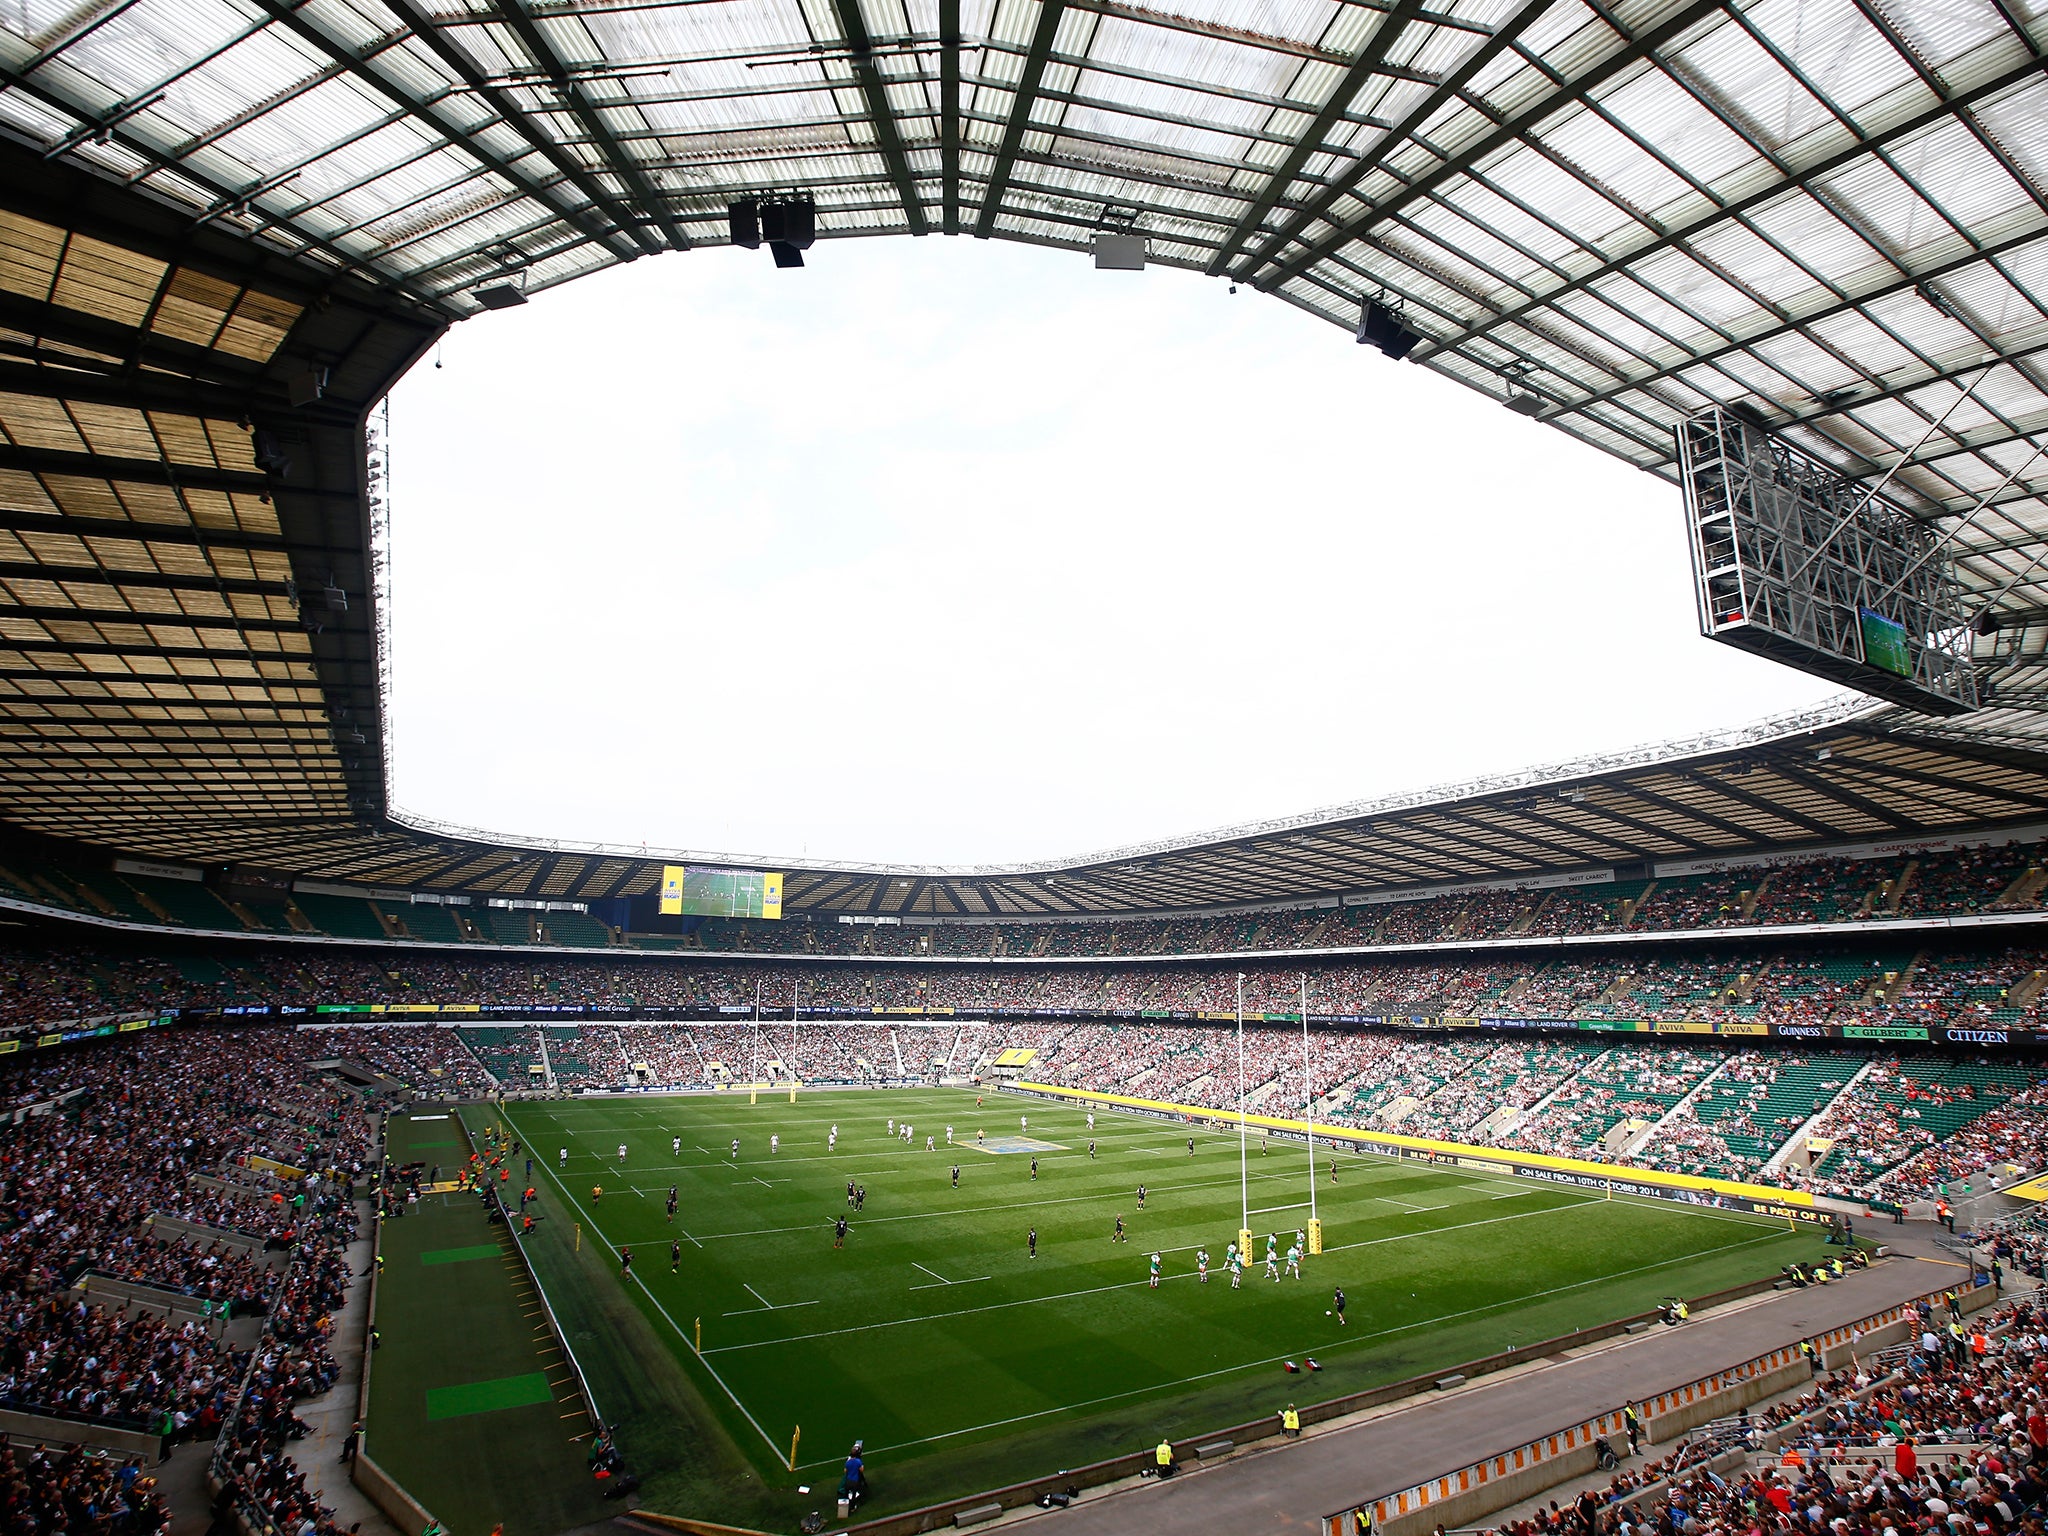 Only around 20,000 seats at the 82,000-capacity Twickenham Stadium are available to the public